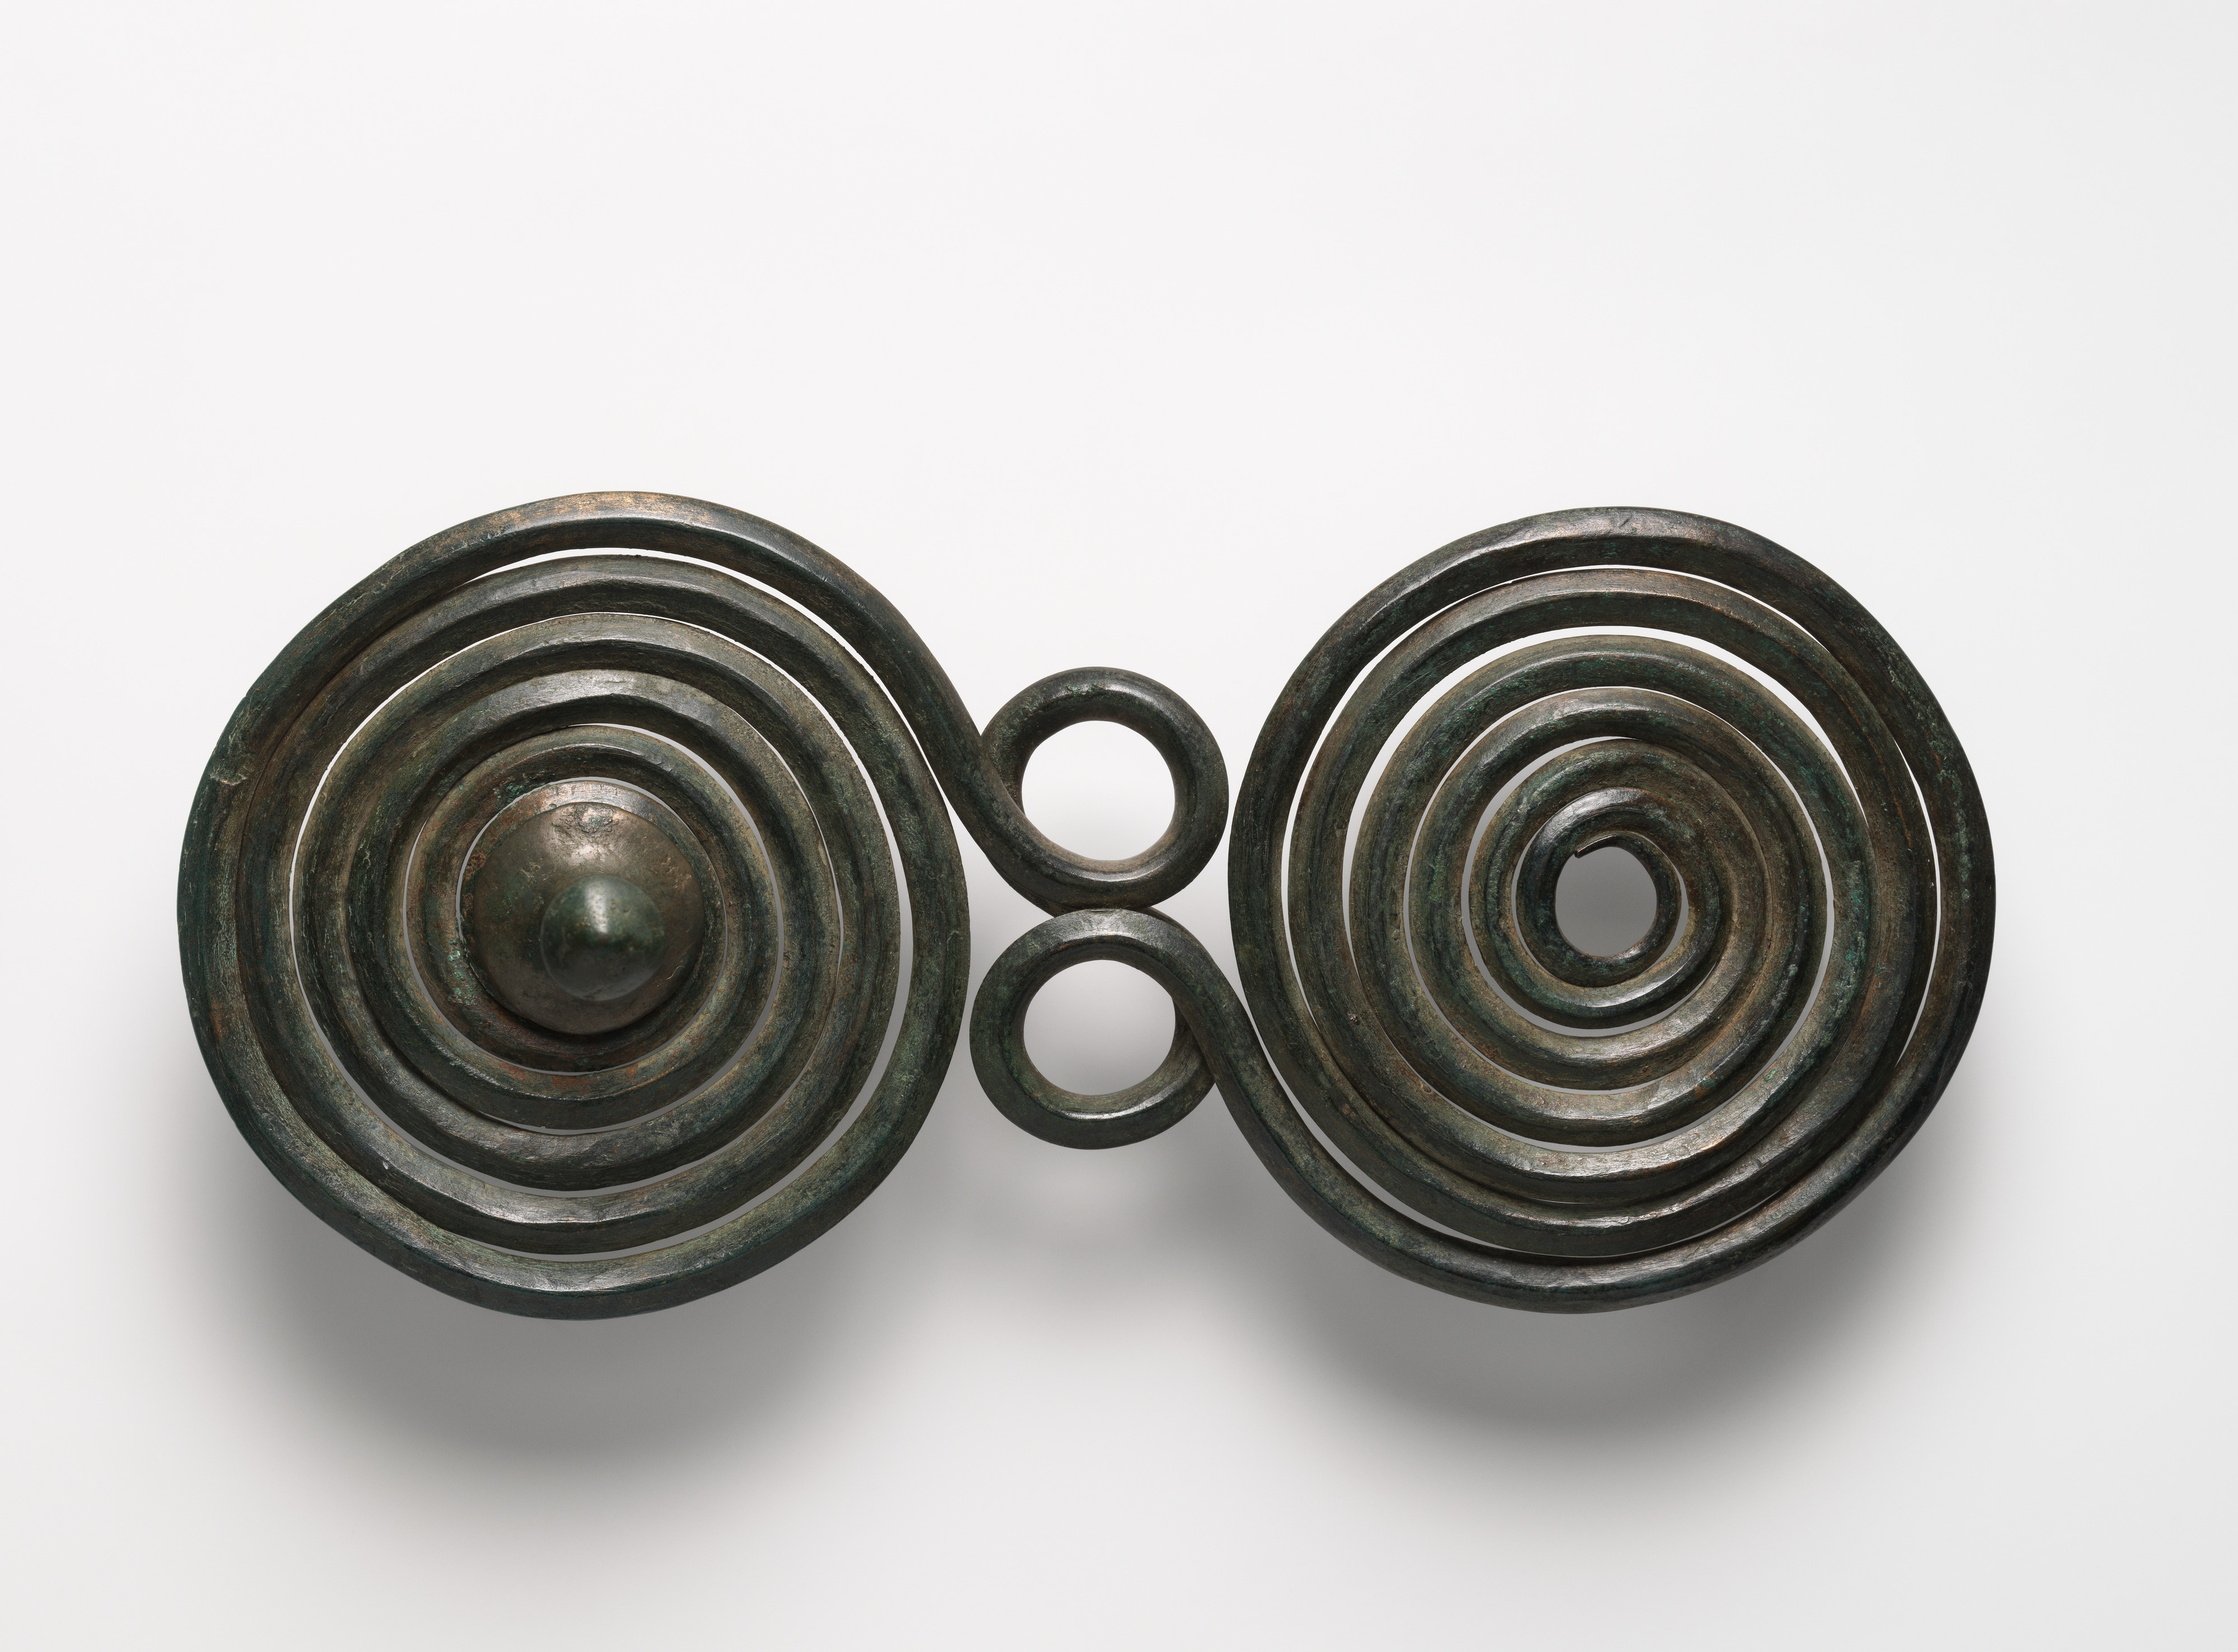 Large Brooch with Spirals